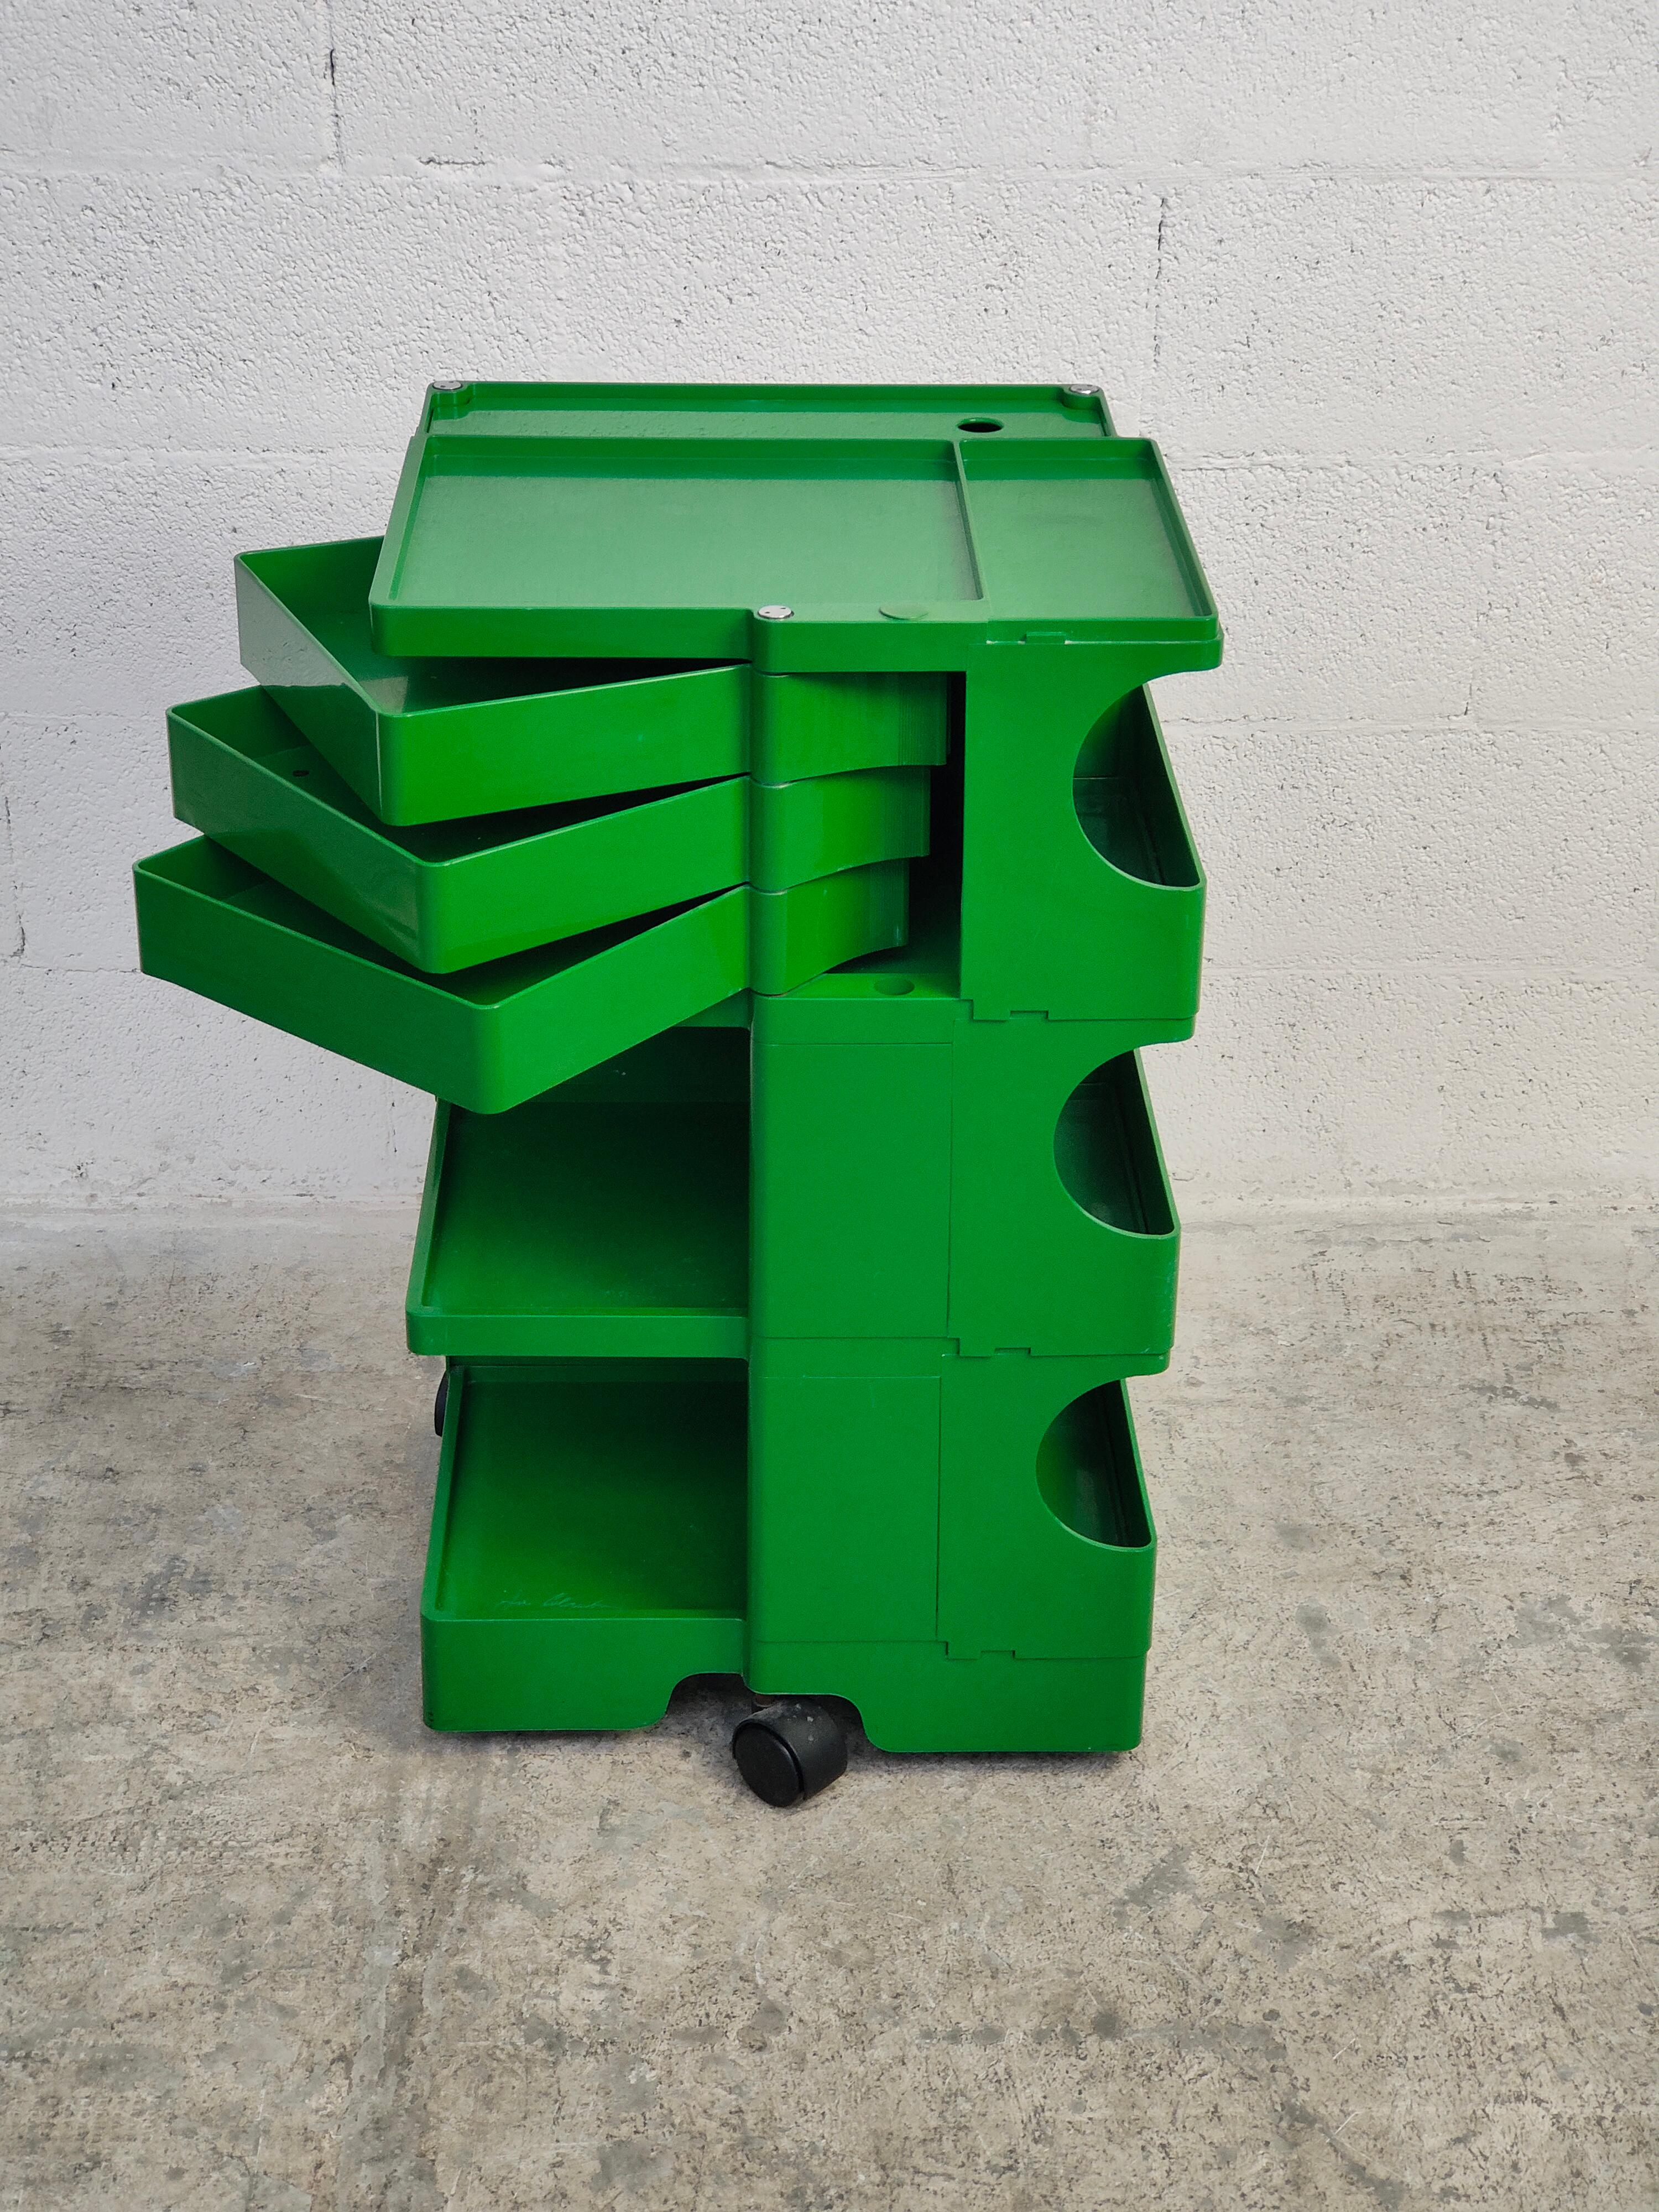 Iconic Boby cart in very rare green color designed by Joe Colombo and produced by Bieffeplast 1970s .
This “Boby” trolley or portable storage system was designed by Joe Colombo in 1969. 
A very handy trolley made of ABS plastic. It has many